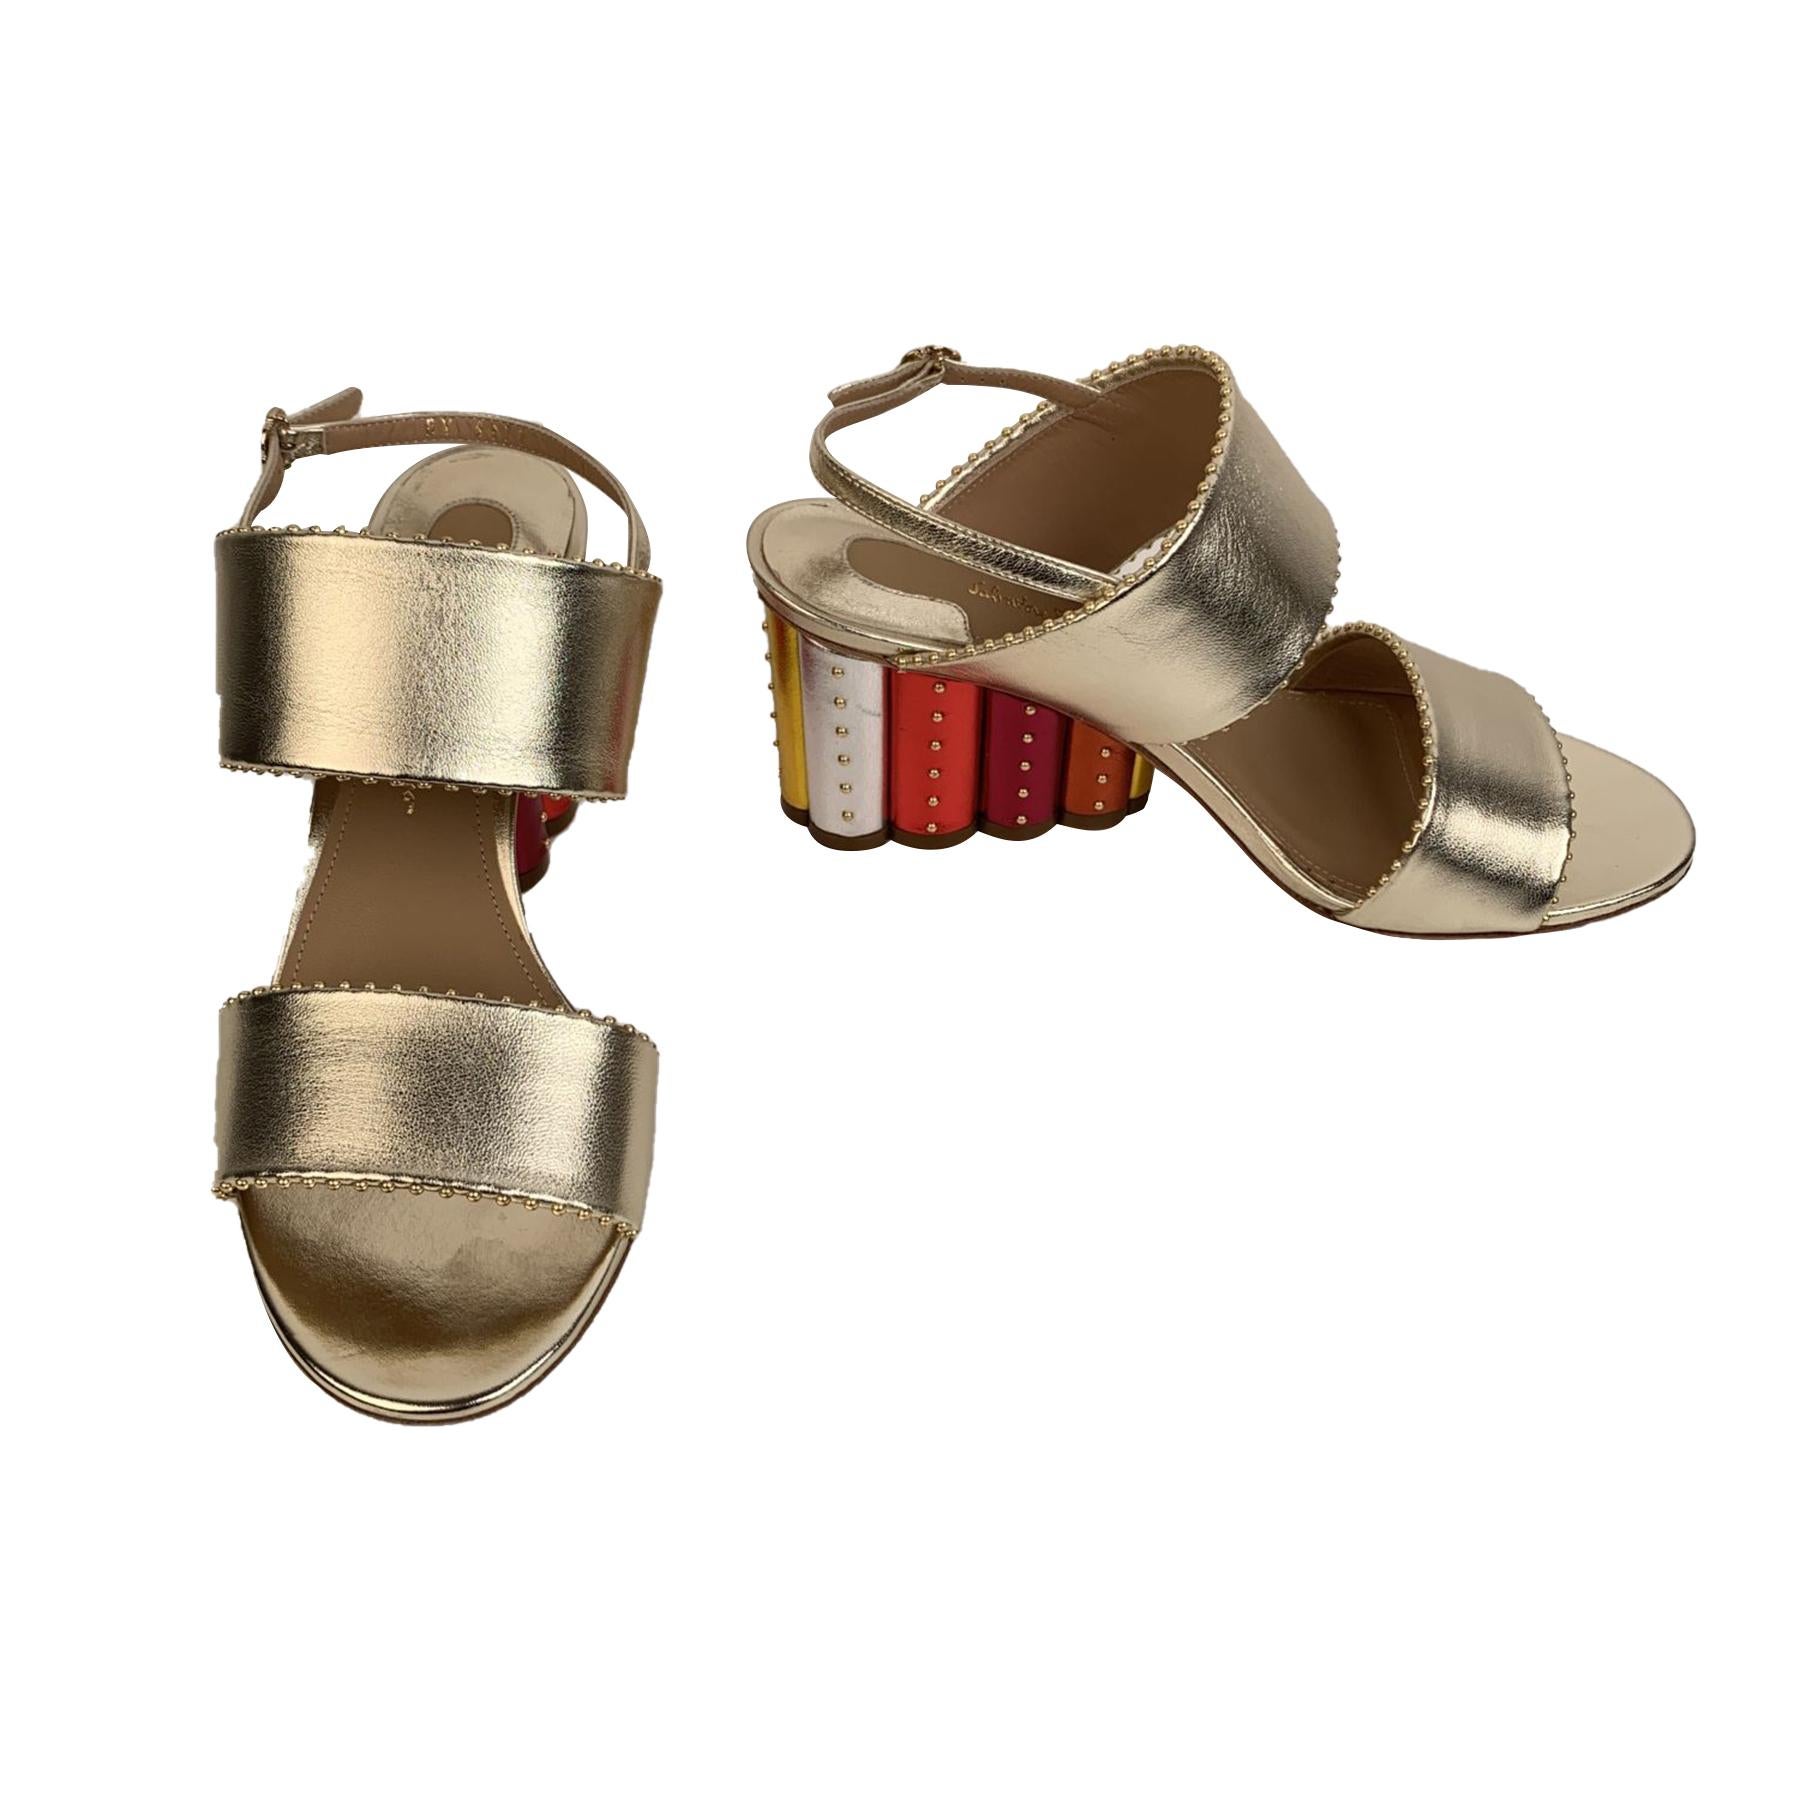 Elegant Salvatore Ferragamo 'Gavi' heeled sandals. Crafted in gold metal leather. They feature peep toe, slingback design, small gold tone studs embellishment along the edges and buckle closure on the ankle. Beautiful Rainbow covered scalloped block